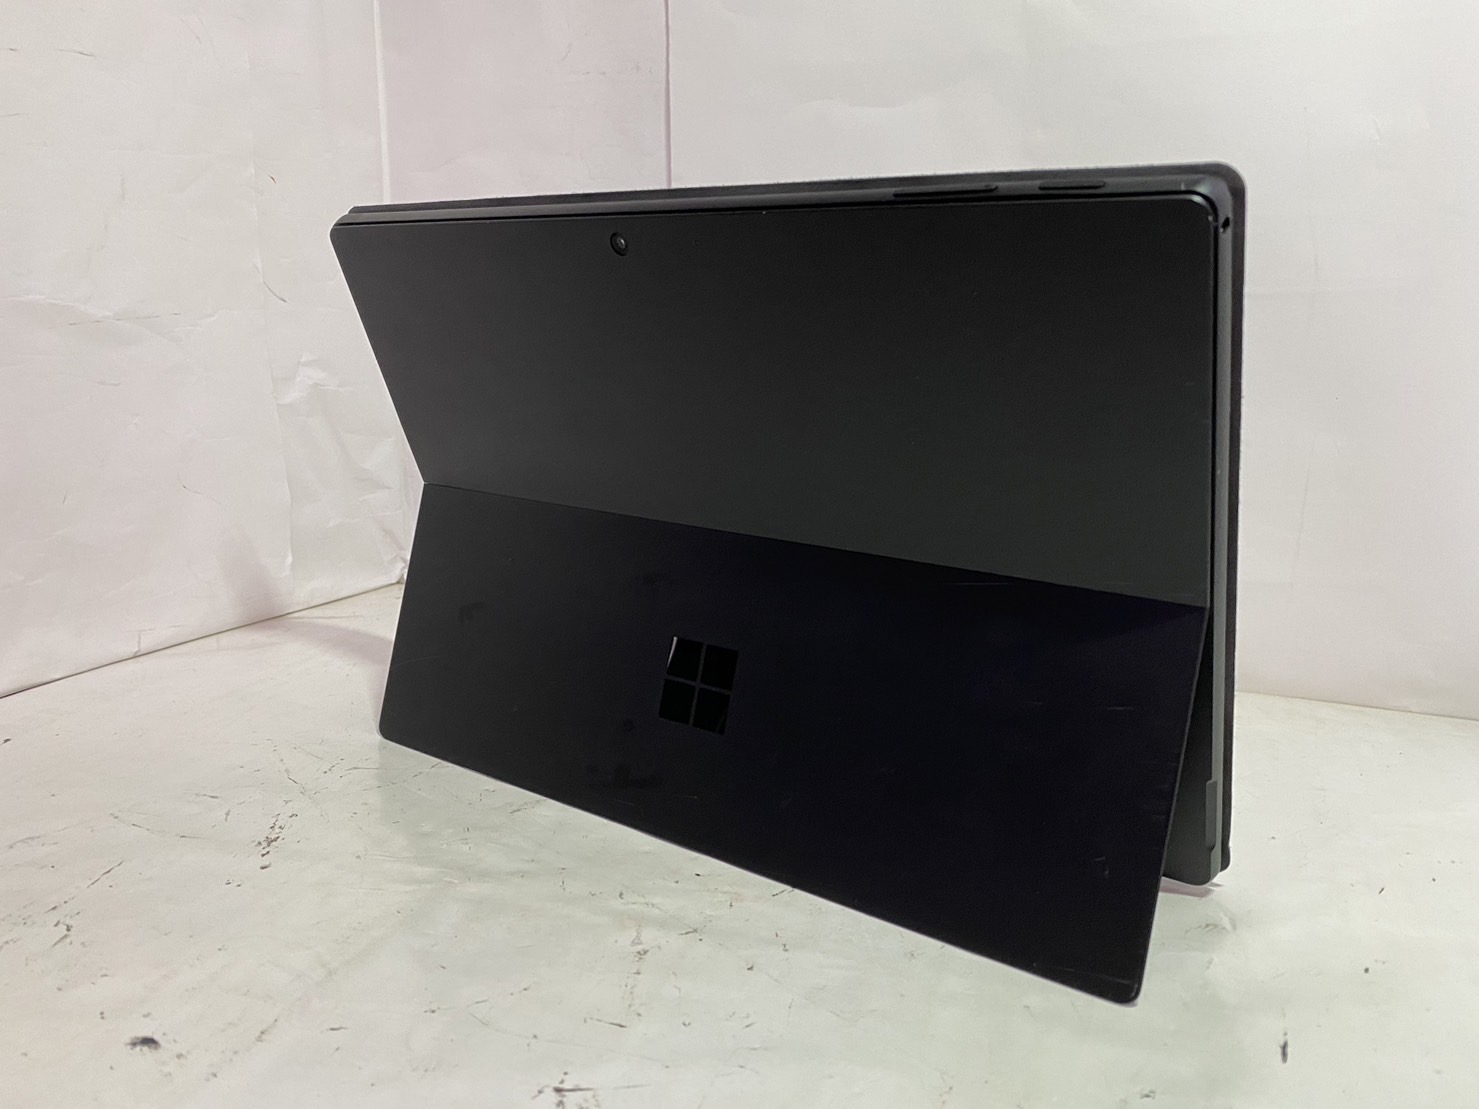 Microsoft Surface 3 pro PC 本体 コンセント ボード